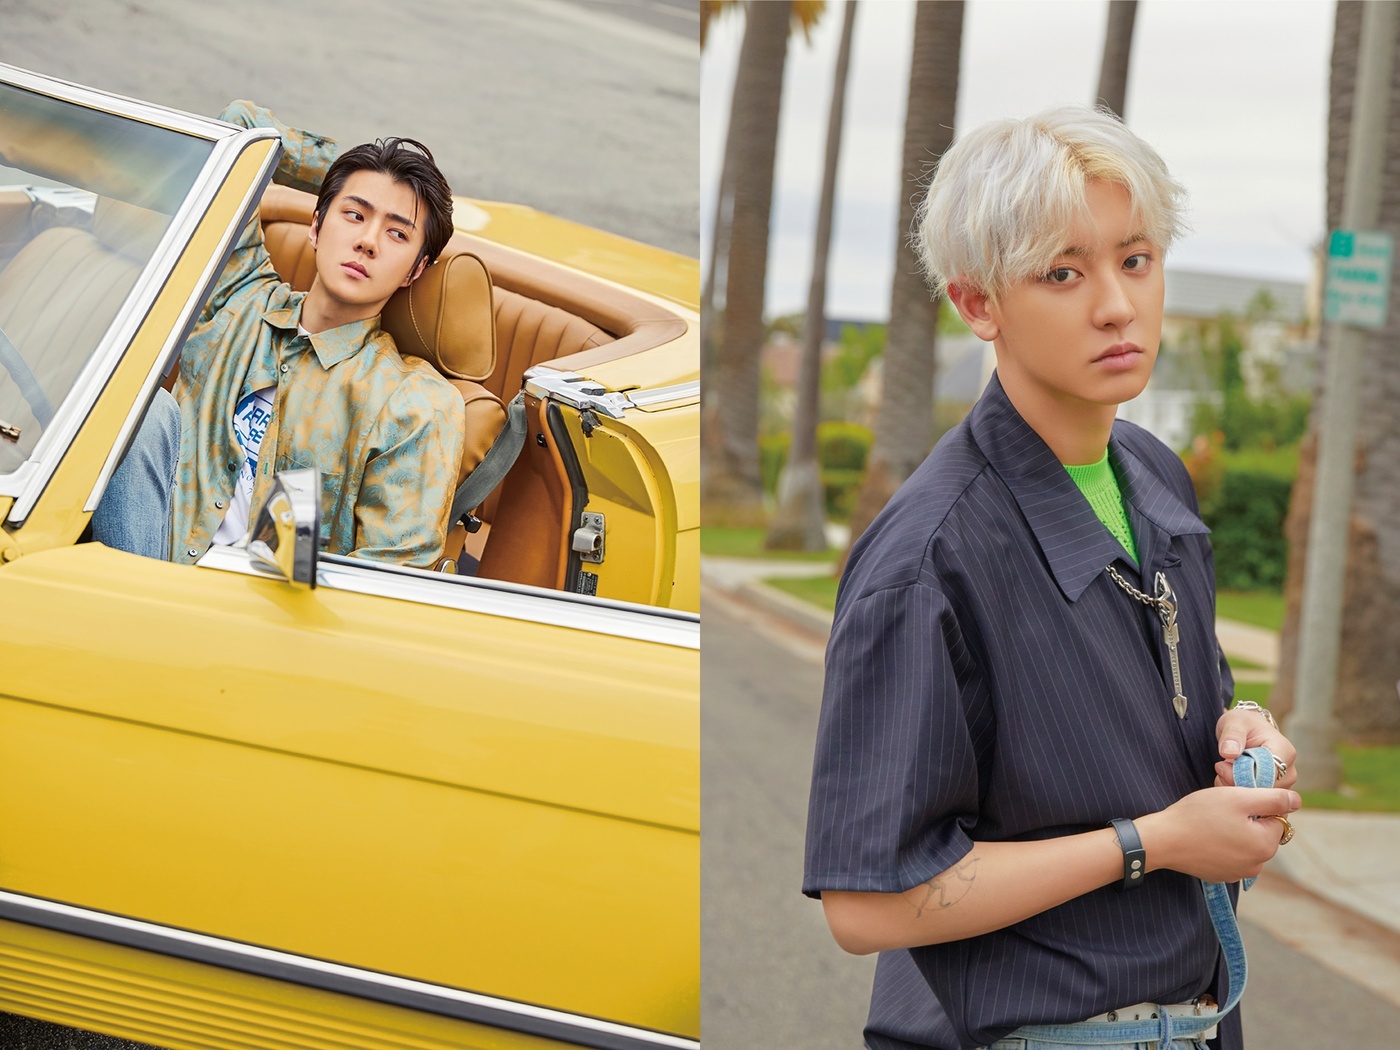 Sehun & Chanyeols first mini-album What a Life (What a Life) will be released at 6 pm on the 22nd at various music sites such as Melon, Flo, Genie, iTunes, Apple Music, Sporty Pie, QQ Music, Cougu Music, Cougar Music, There are six songs in the hip-hop genre including.In particular, this album was produced by Dynamic Duos Gaco and Divine Channel, and Sehun & Chanyeol participated in the entire song, as well as his own song.In the meantime, Sehun has been recognized for his musical ability by participating in the solo song Go (Go) written by EXO concert, and Chanyeol in the EXO album title songs Love Shot (Love Shot), Ko Ko Bop (Ko Ko Bop), and Sometimes With You, which are recognized for his musical ability. Ill collect.In addition, What a Life, one of the triple title songs, is a hip-hop song with a unique flak sound and addictive refrain. It contains a pleasant message that Lets work and play all the time. It is enough to meet the bright and positive energy unique to Sehun & Chanyeol.In addition, Sehun & Chanyeol will hold a showcase at Move Hall in Seogyo-dong, Mapo-gu, Seoul, at 8 pm on the 22nd to commemorate the release of his debut album. The site will be broadcast live on Naver V LIVEs EXO channel.On the other hand, Sehun & Chanyeols first mini album What a life will be released on July 22nd.